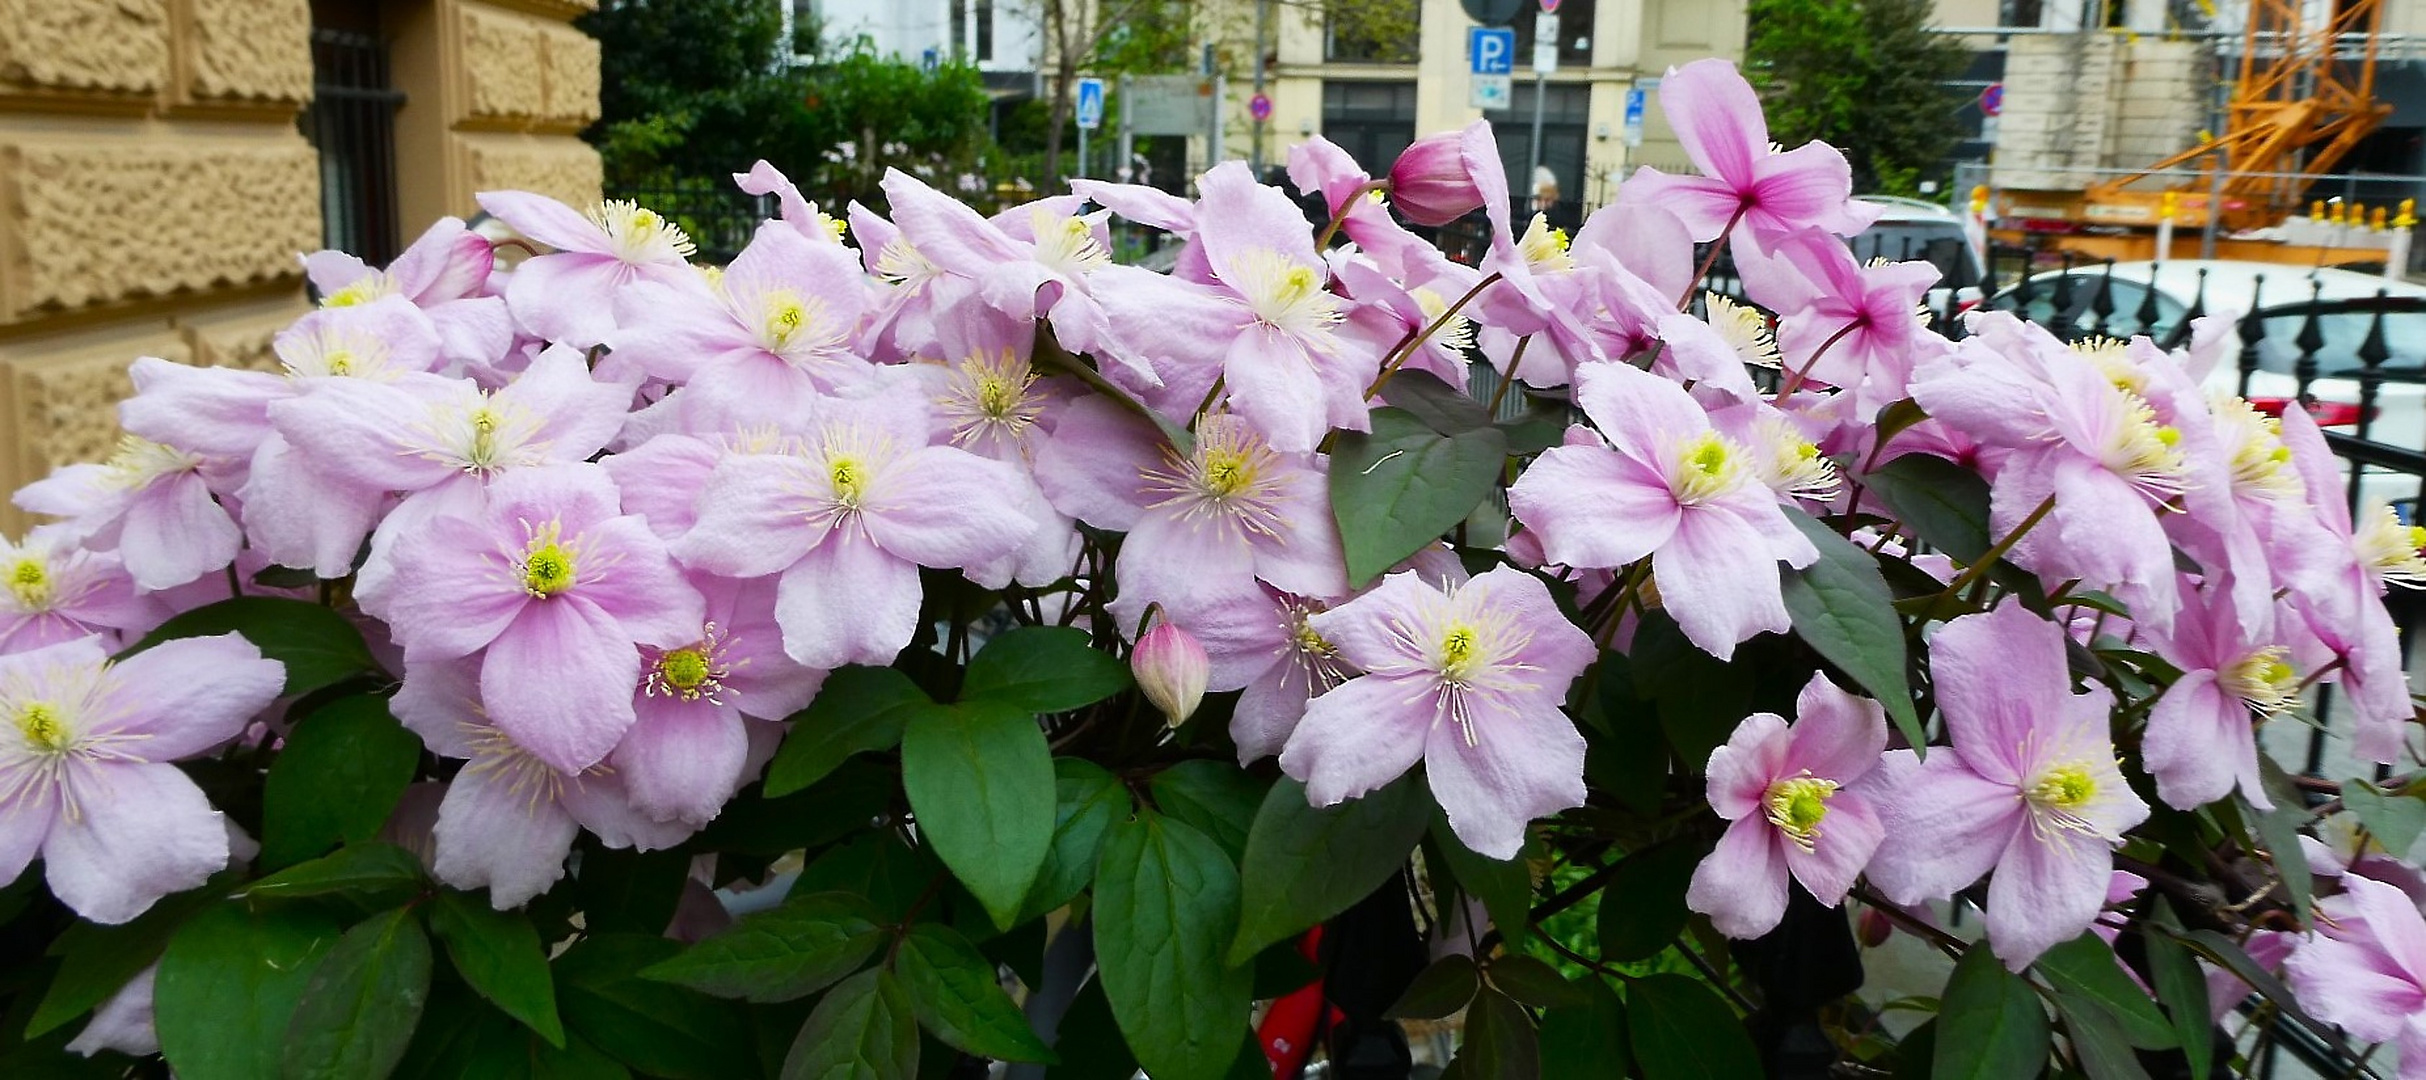 Clematis in the City